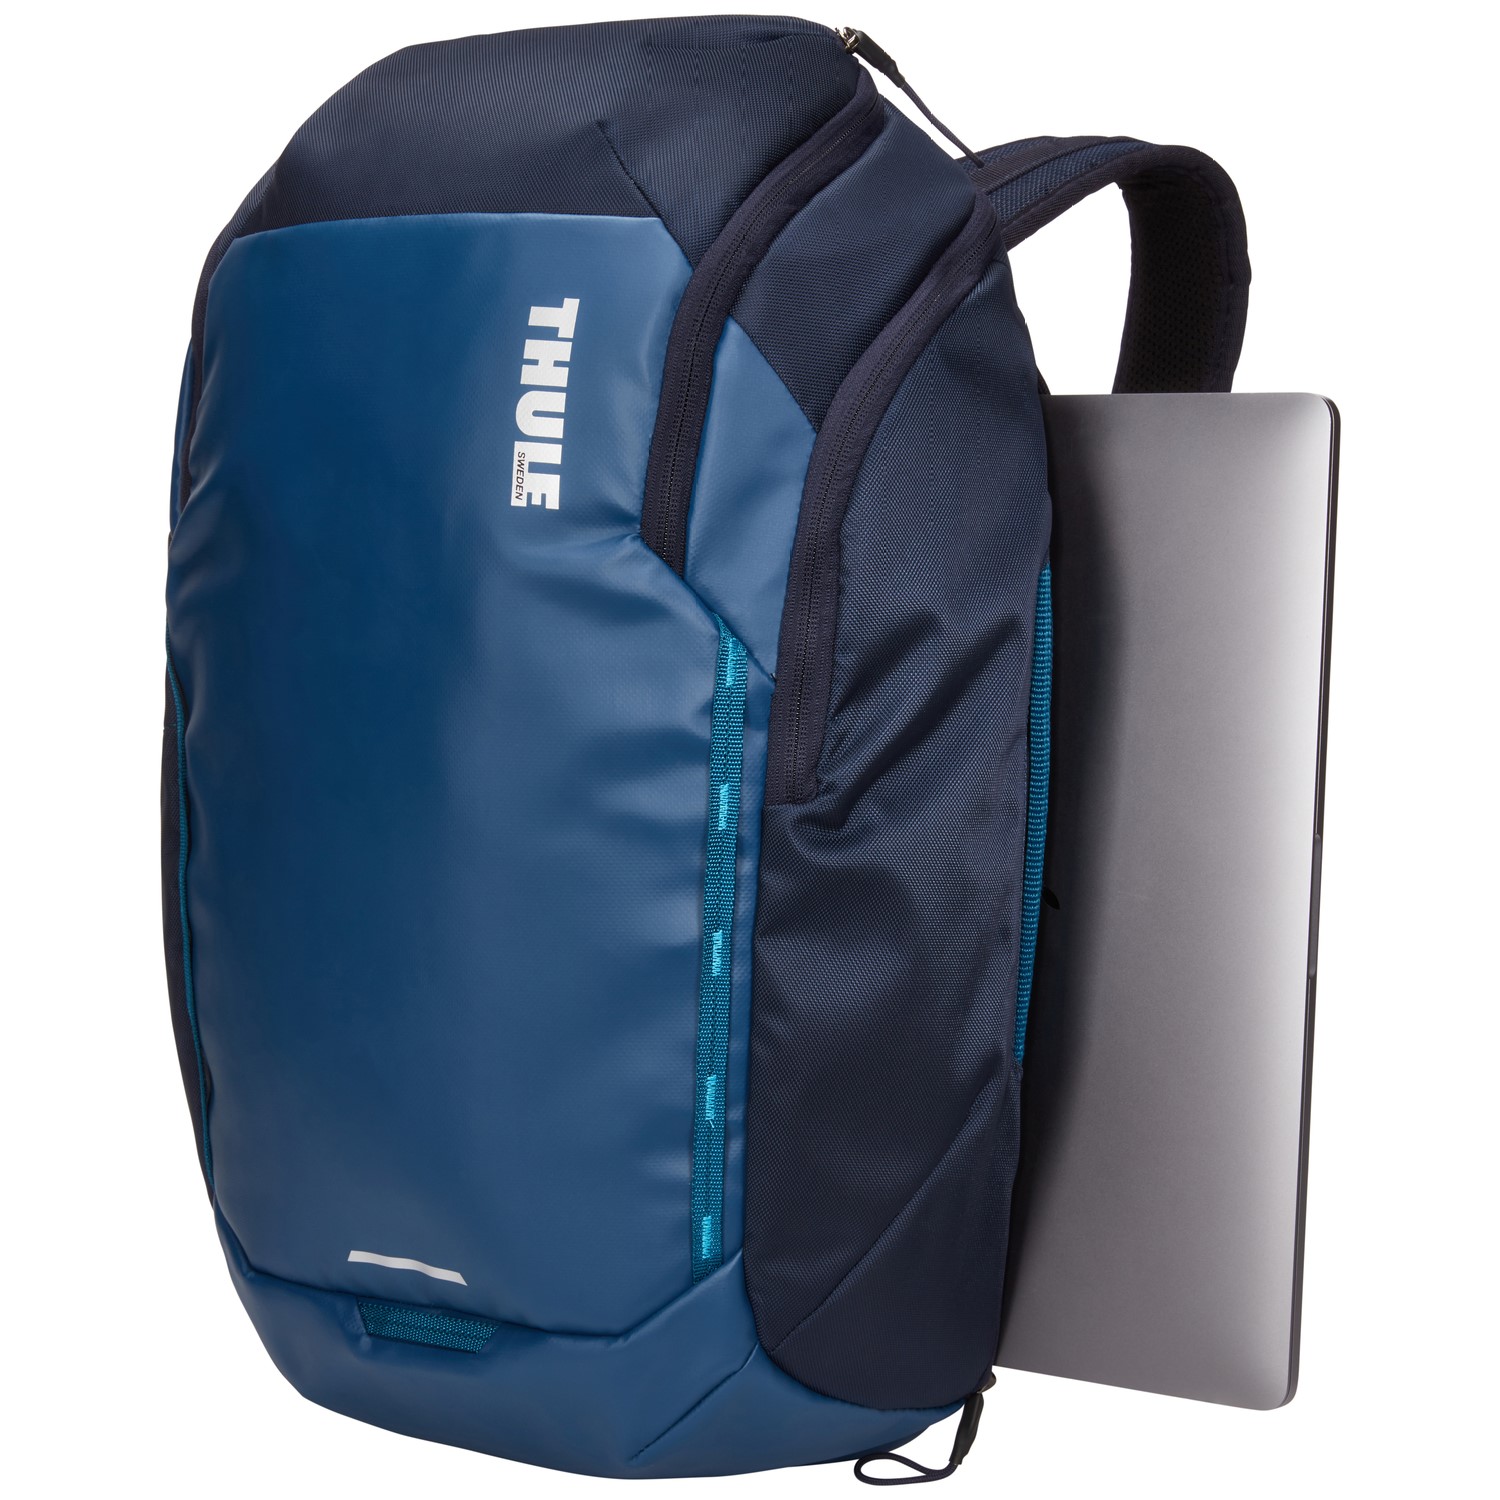 Quickly access your laptop on the go with the side zip